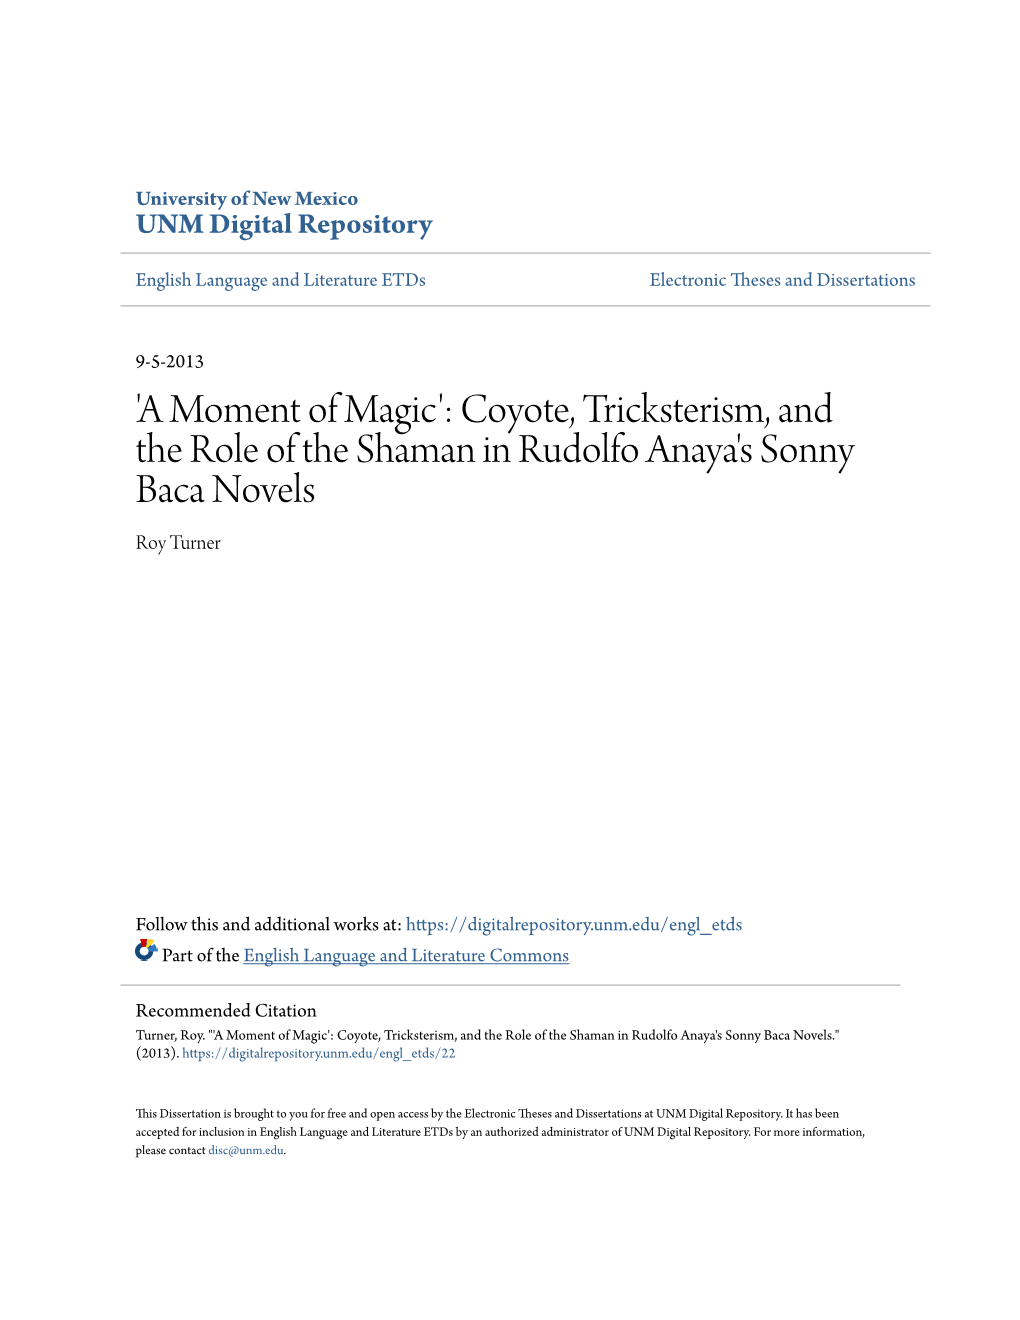 'A Moment of Magic': Coyote, Tricksterism, and the Role of the Shaman in Rudolfo Anaya's Sonny Baca Novels Roy Turner